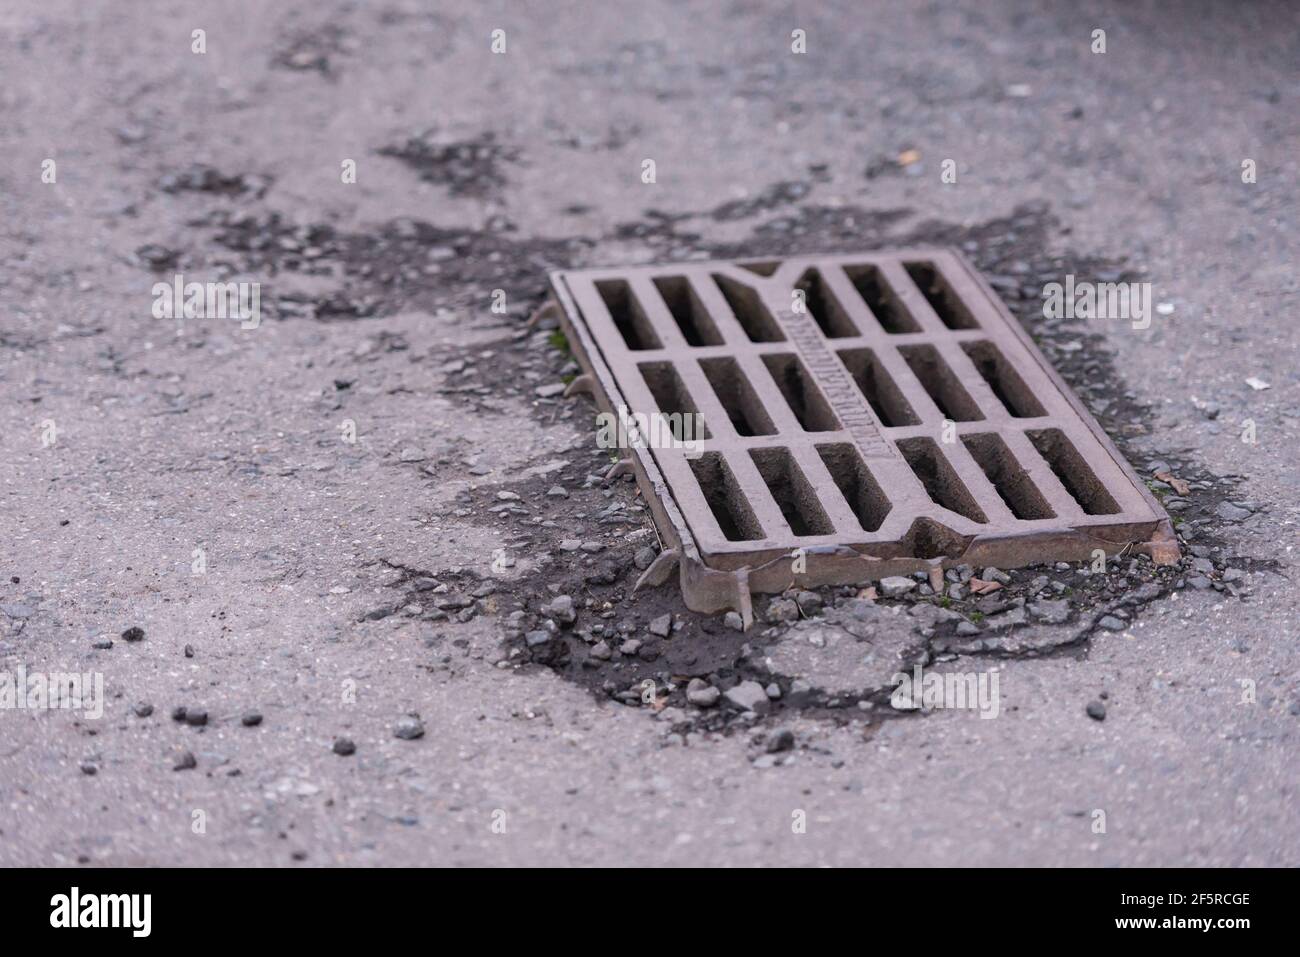 Rainwater grate in asphalt. An old rain grate protrudes from the asphalt. Stock Photo